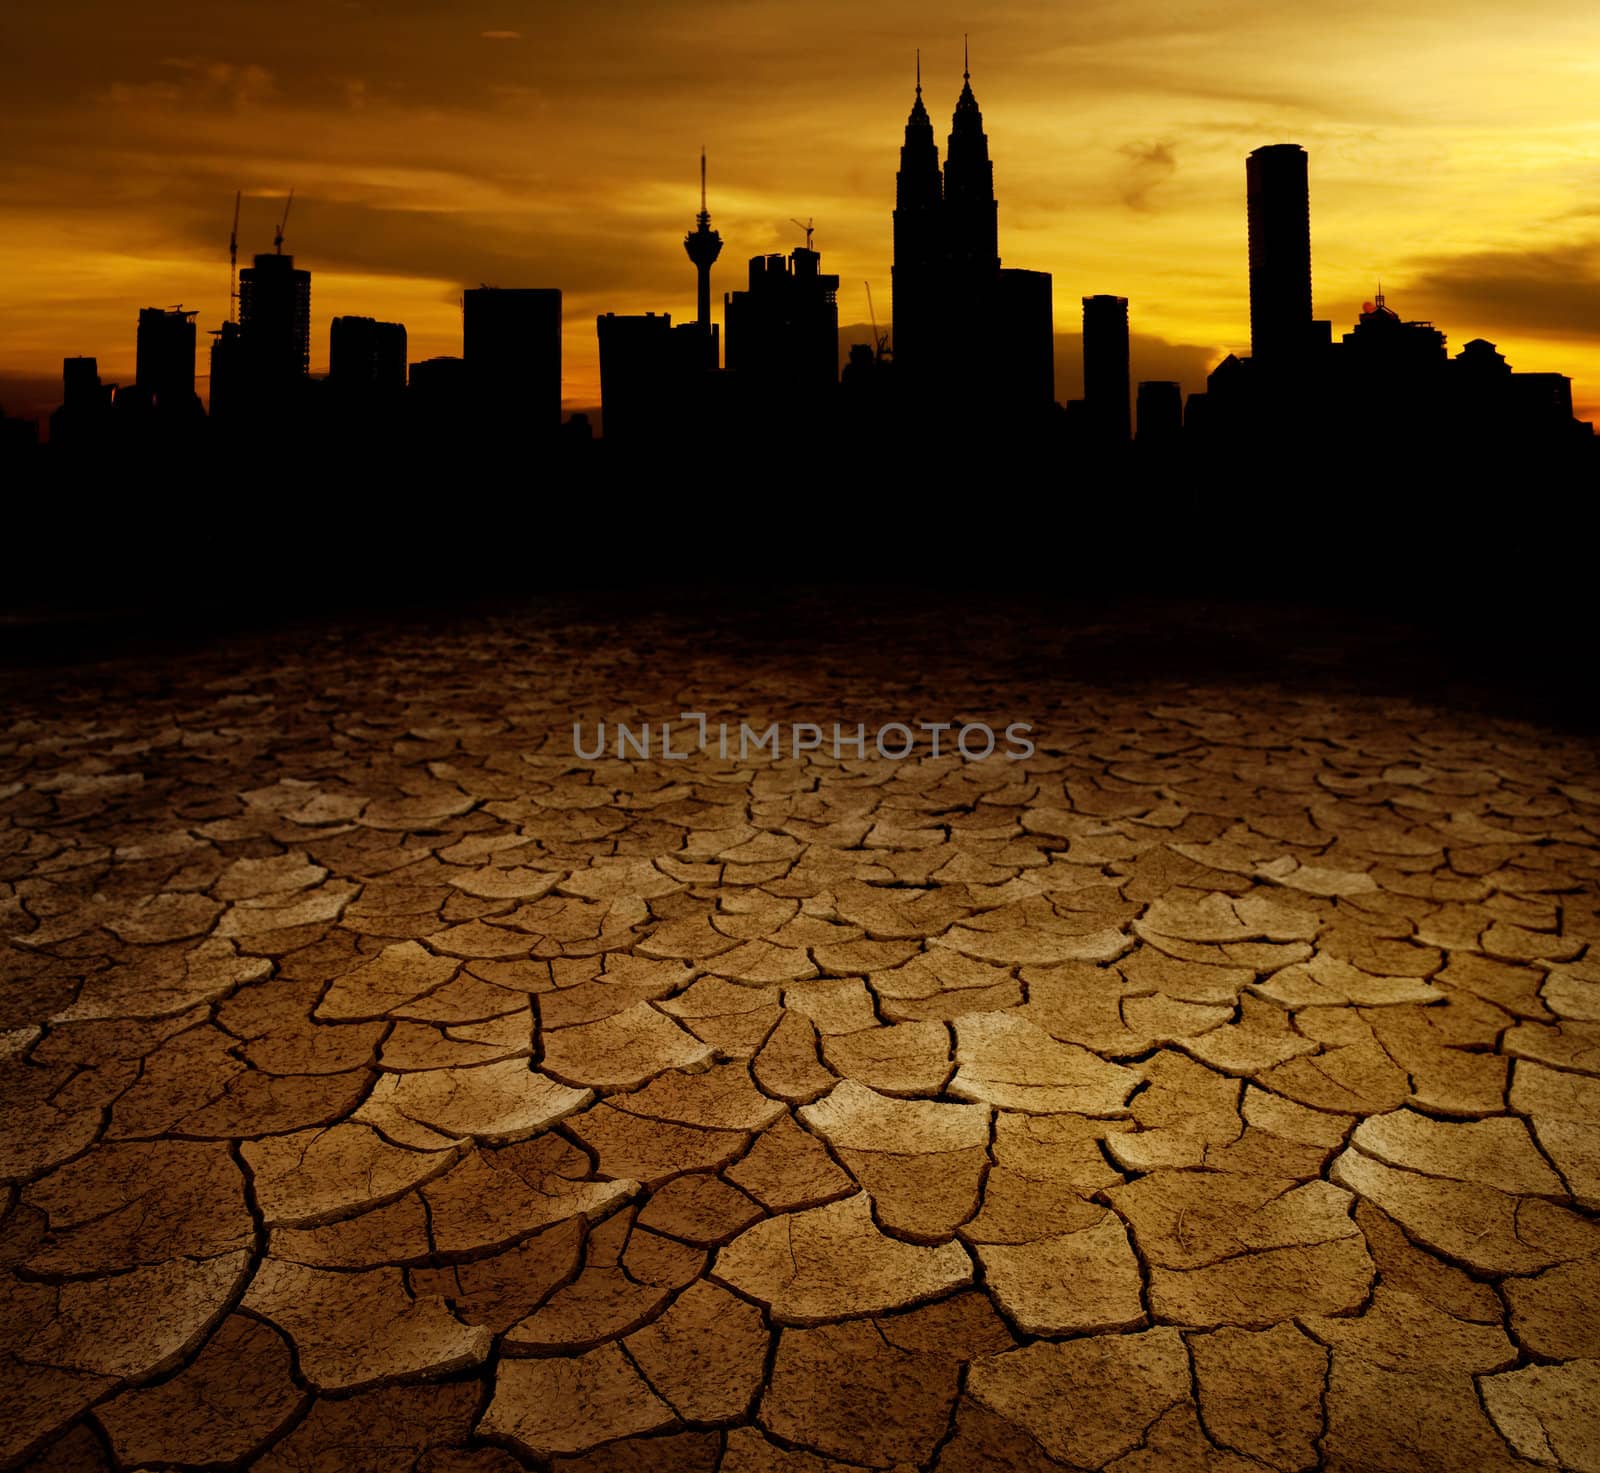 A city looks over a desolate cracked earth landscape in sunset